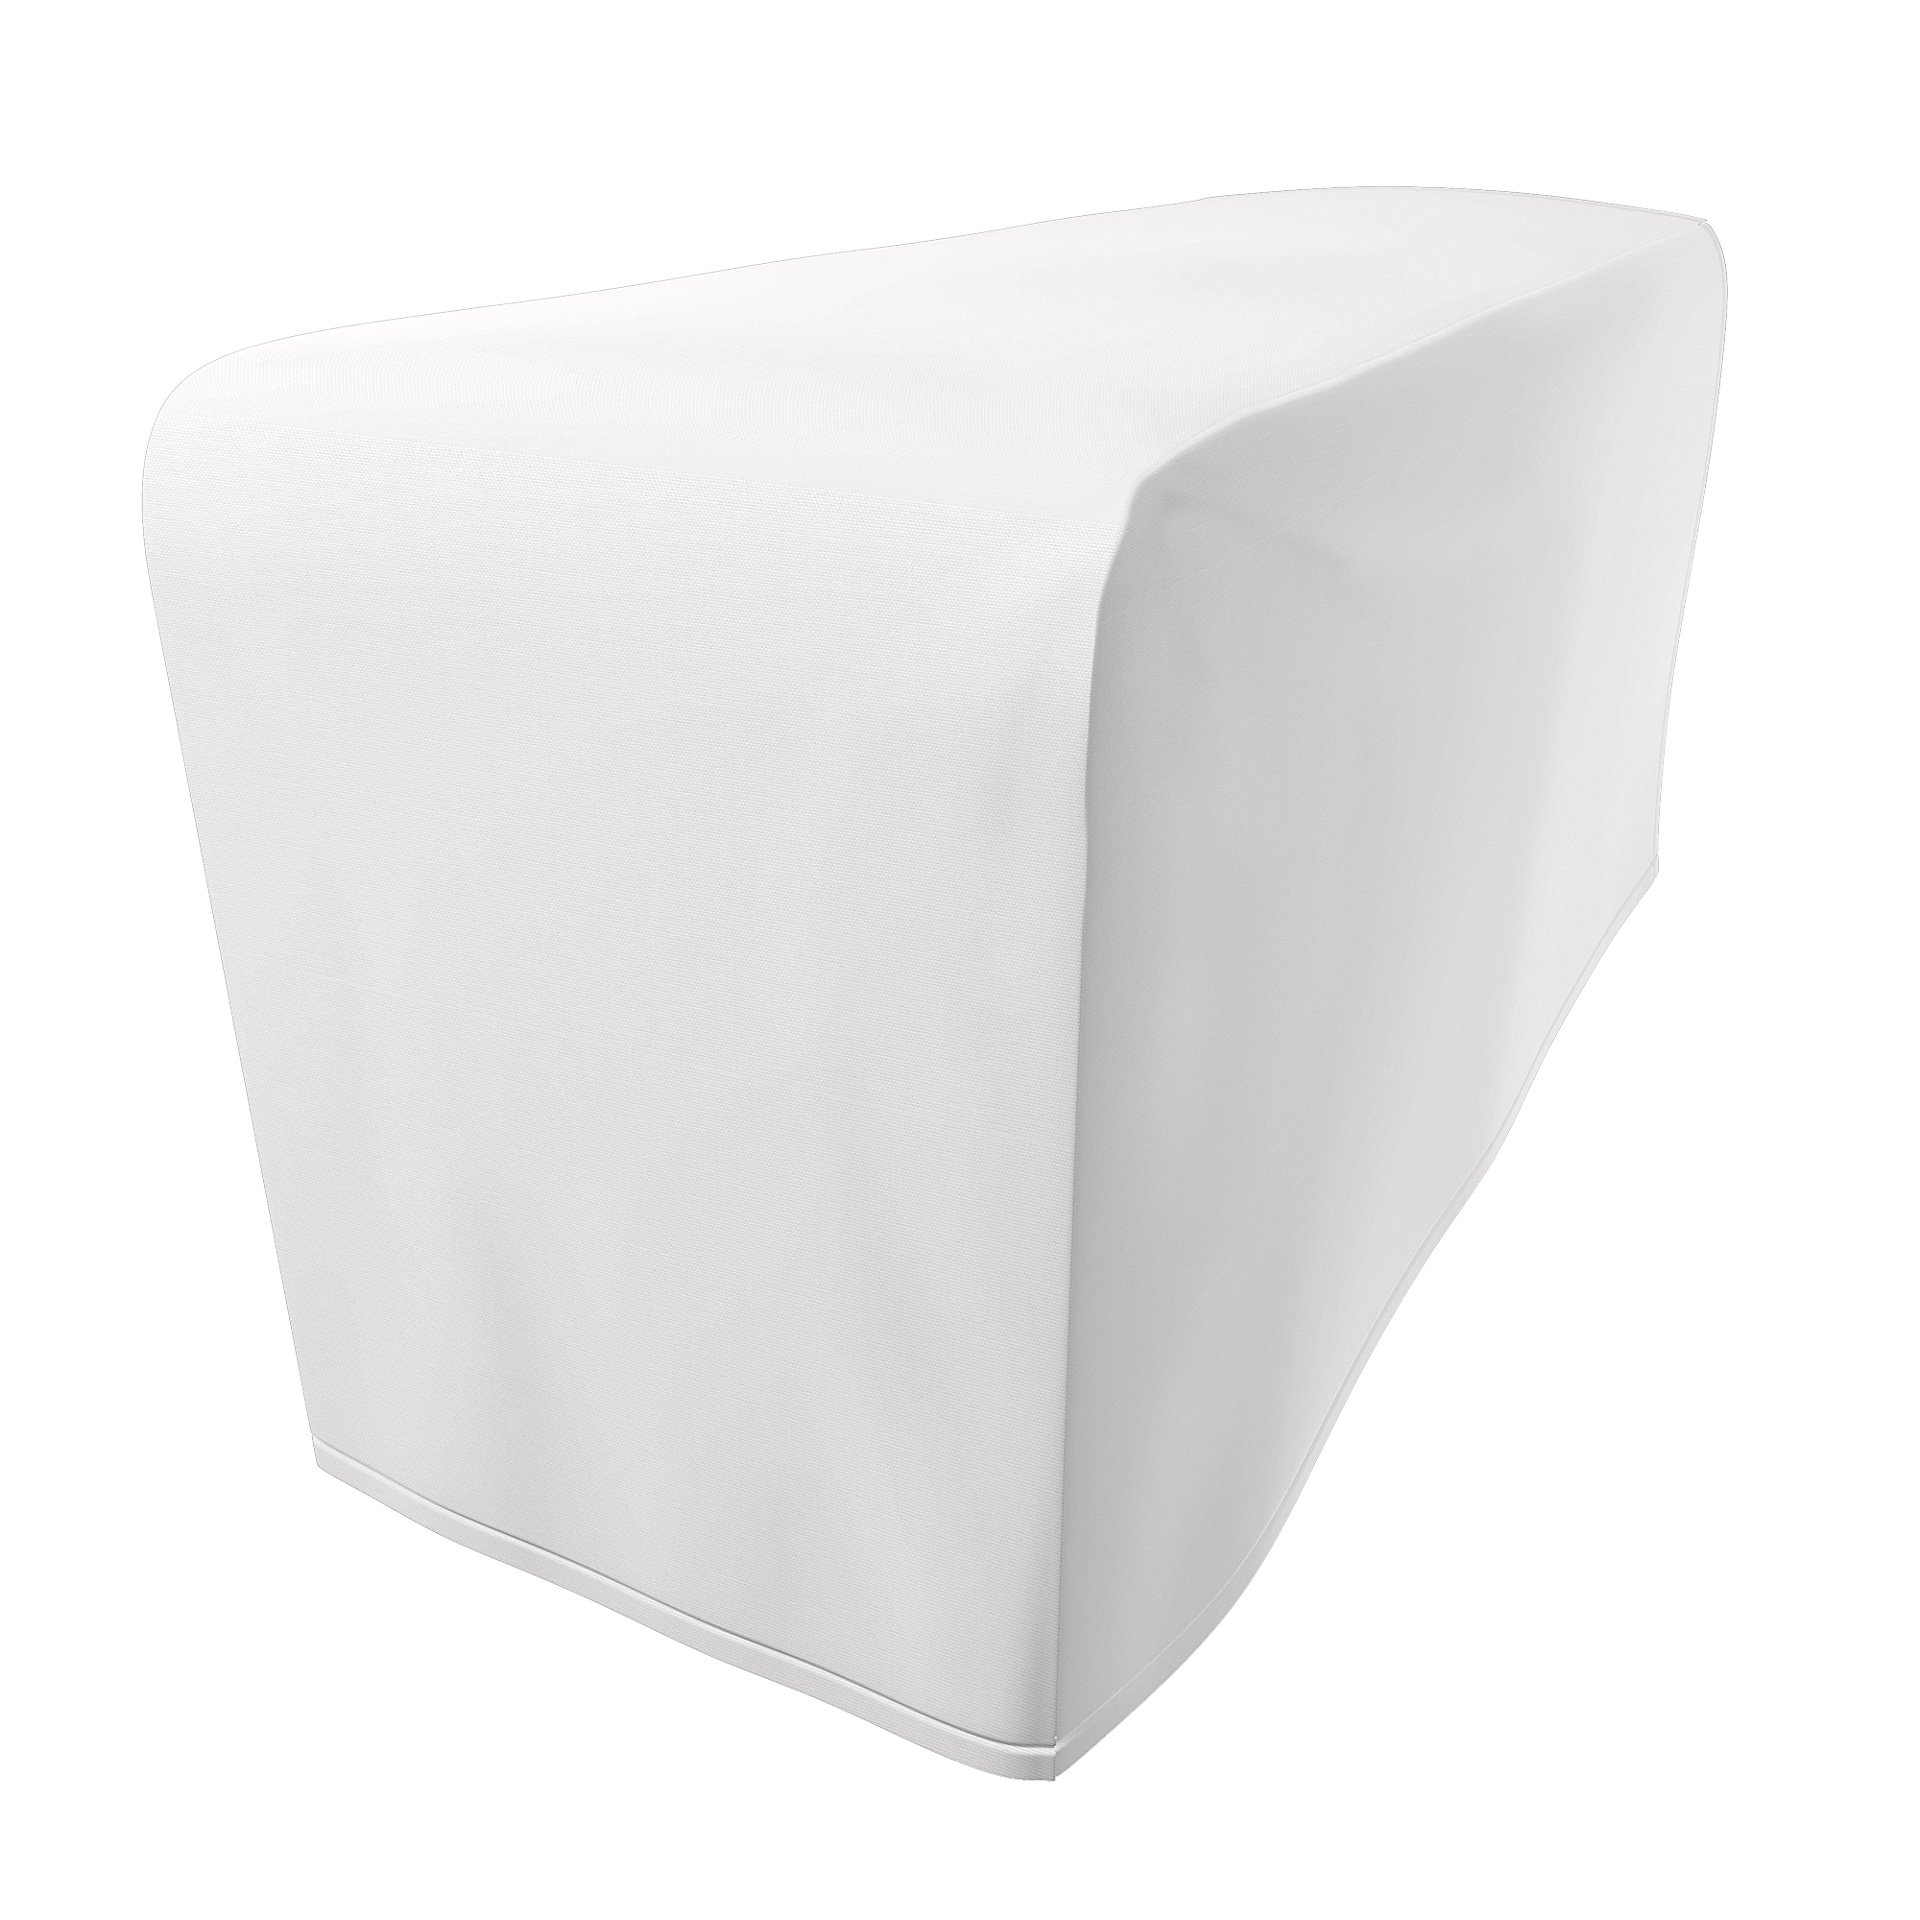 IKEA - Goteborg Armrest Protectors (One pair), Absolute White, Cotton - Bemz